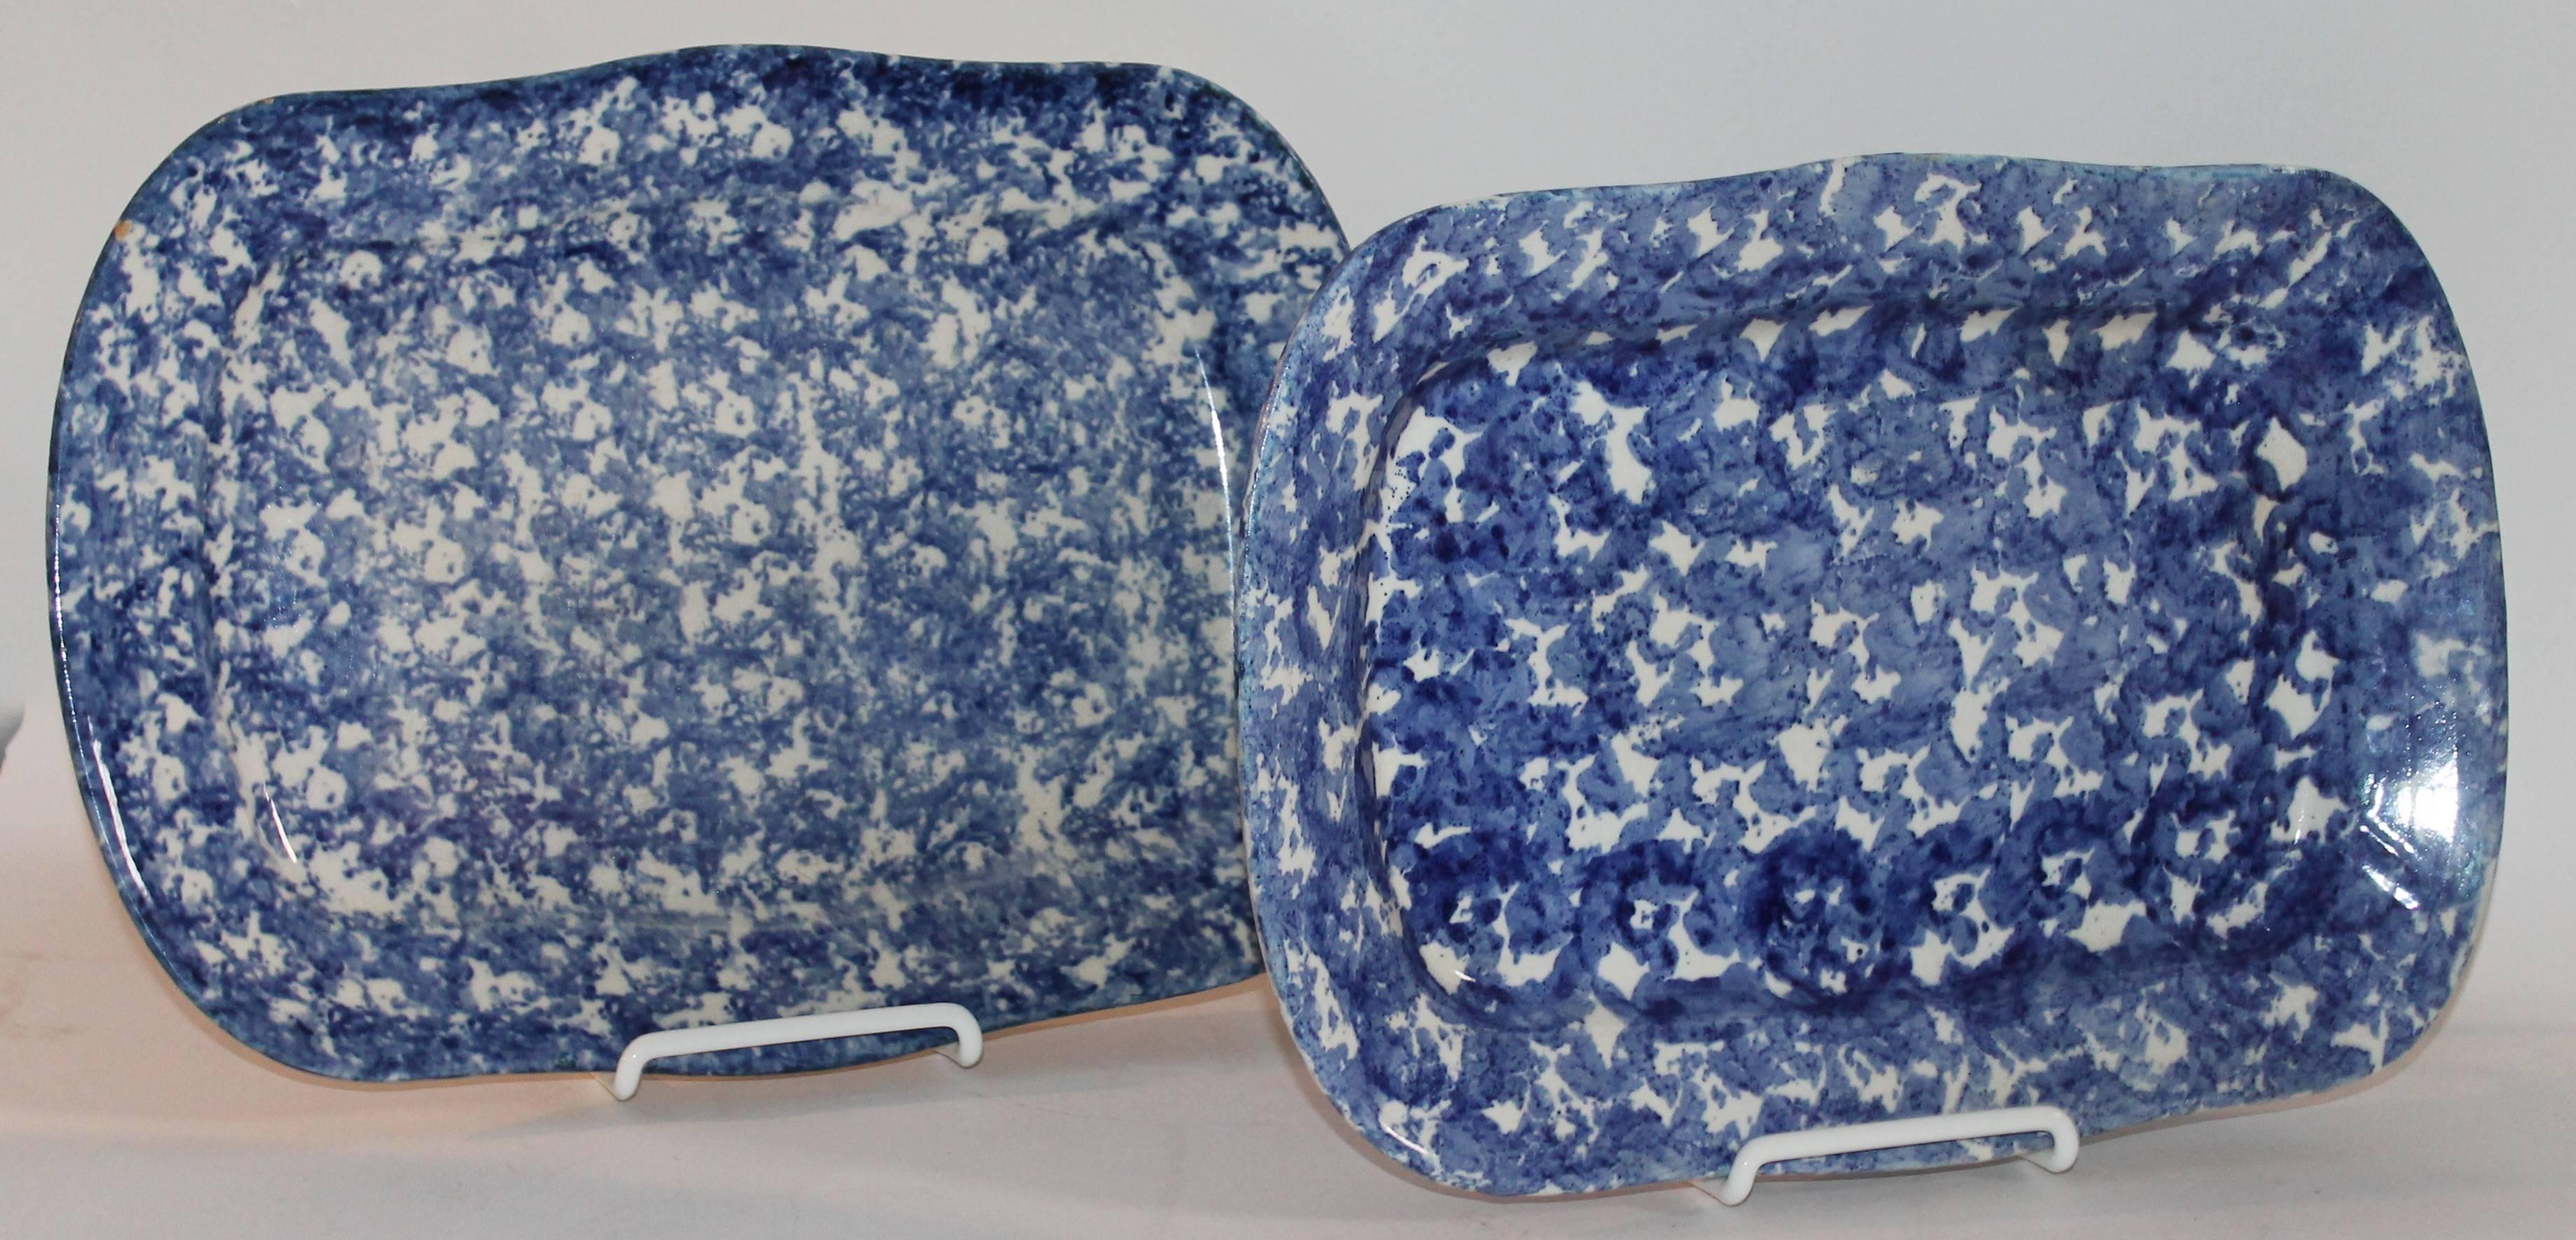 19th Century Sponge Ware Patterned Serving Platters In Excellent Condition For Sale In Los Angeles, CA